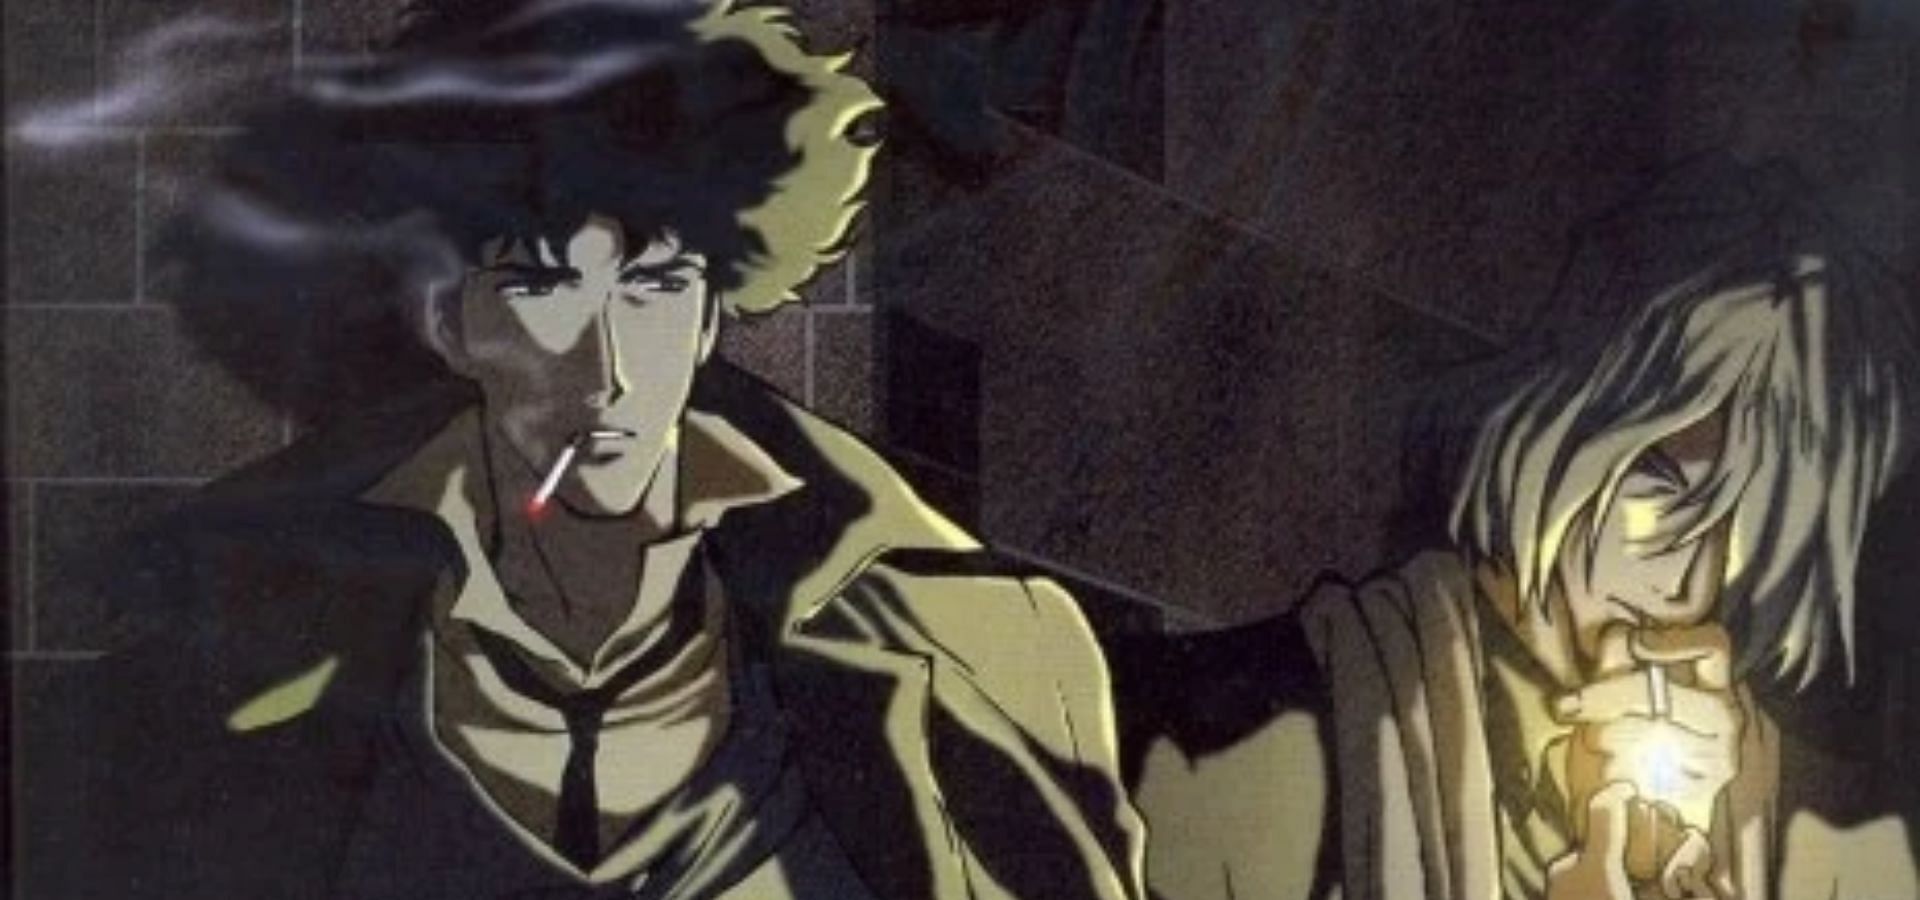 One of the famous worst rivalries in anime, Spike Spiegel and Vicious (Image via Tomorrow Studios)